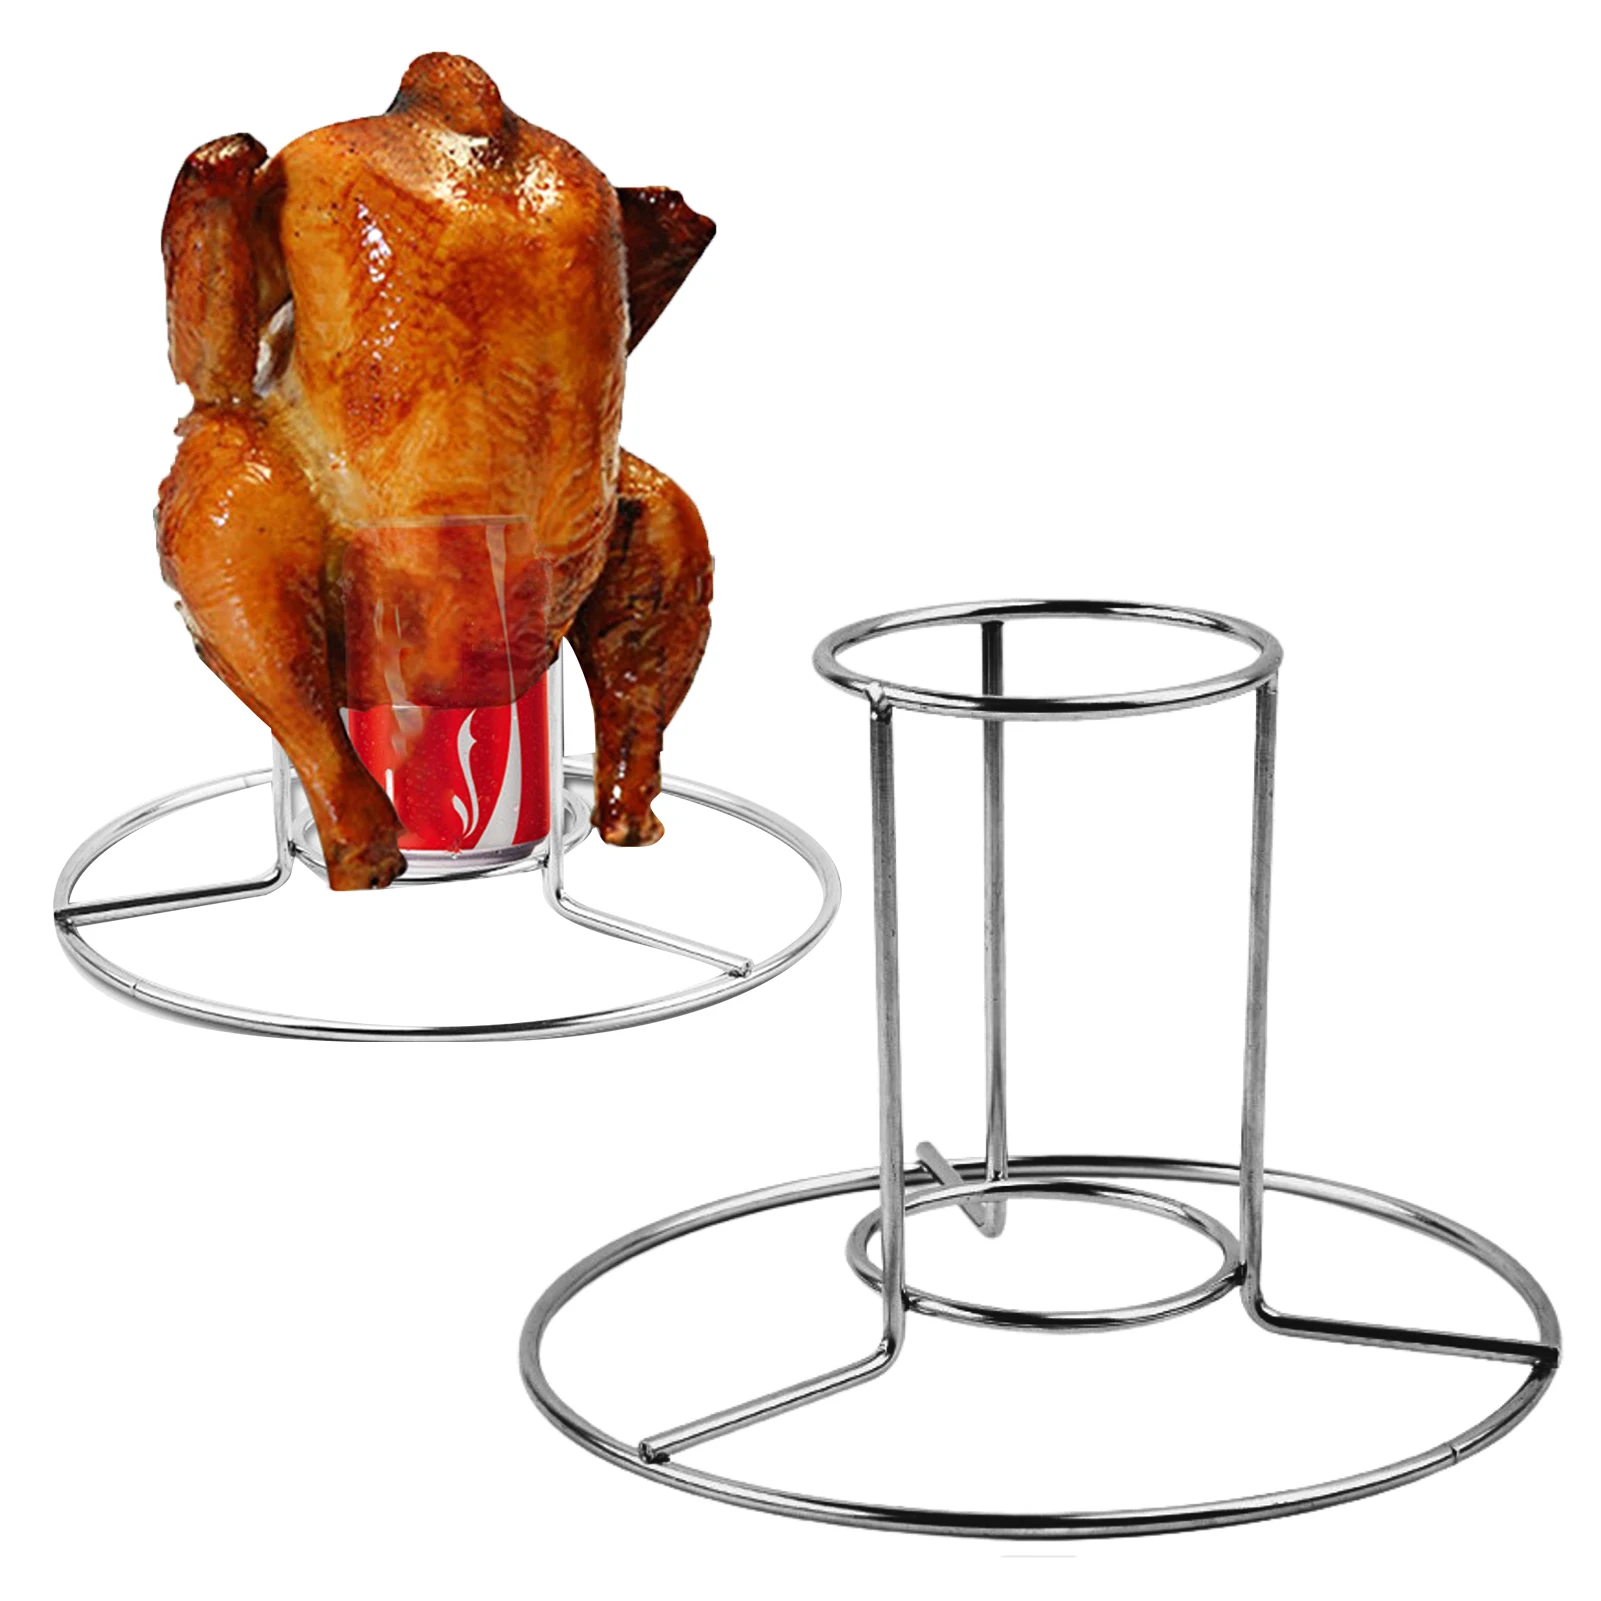 

Chicken Roaster Rack Beer Can Chicken Turkey Roaster BBQ Grill Rack Stand Holder Tray Beercan Chicken Rack Barbeque Tools